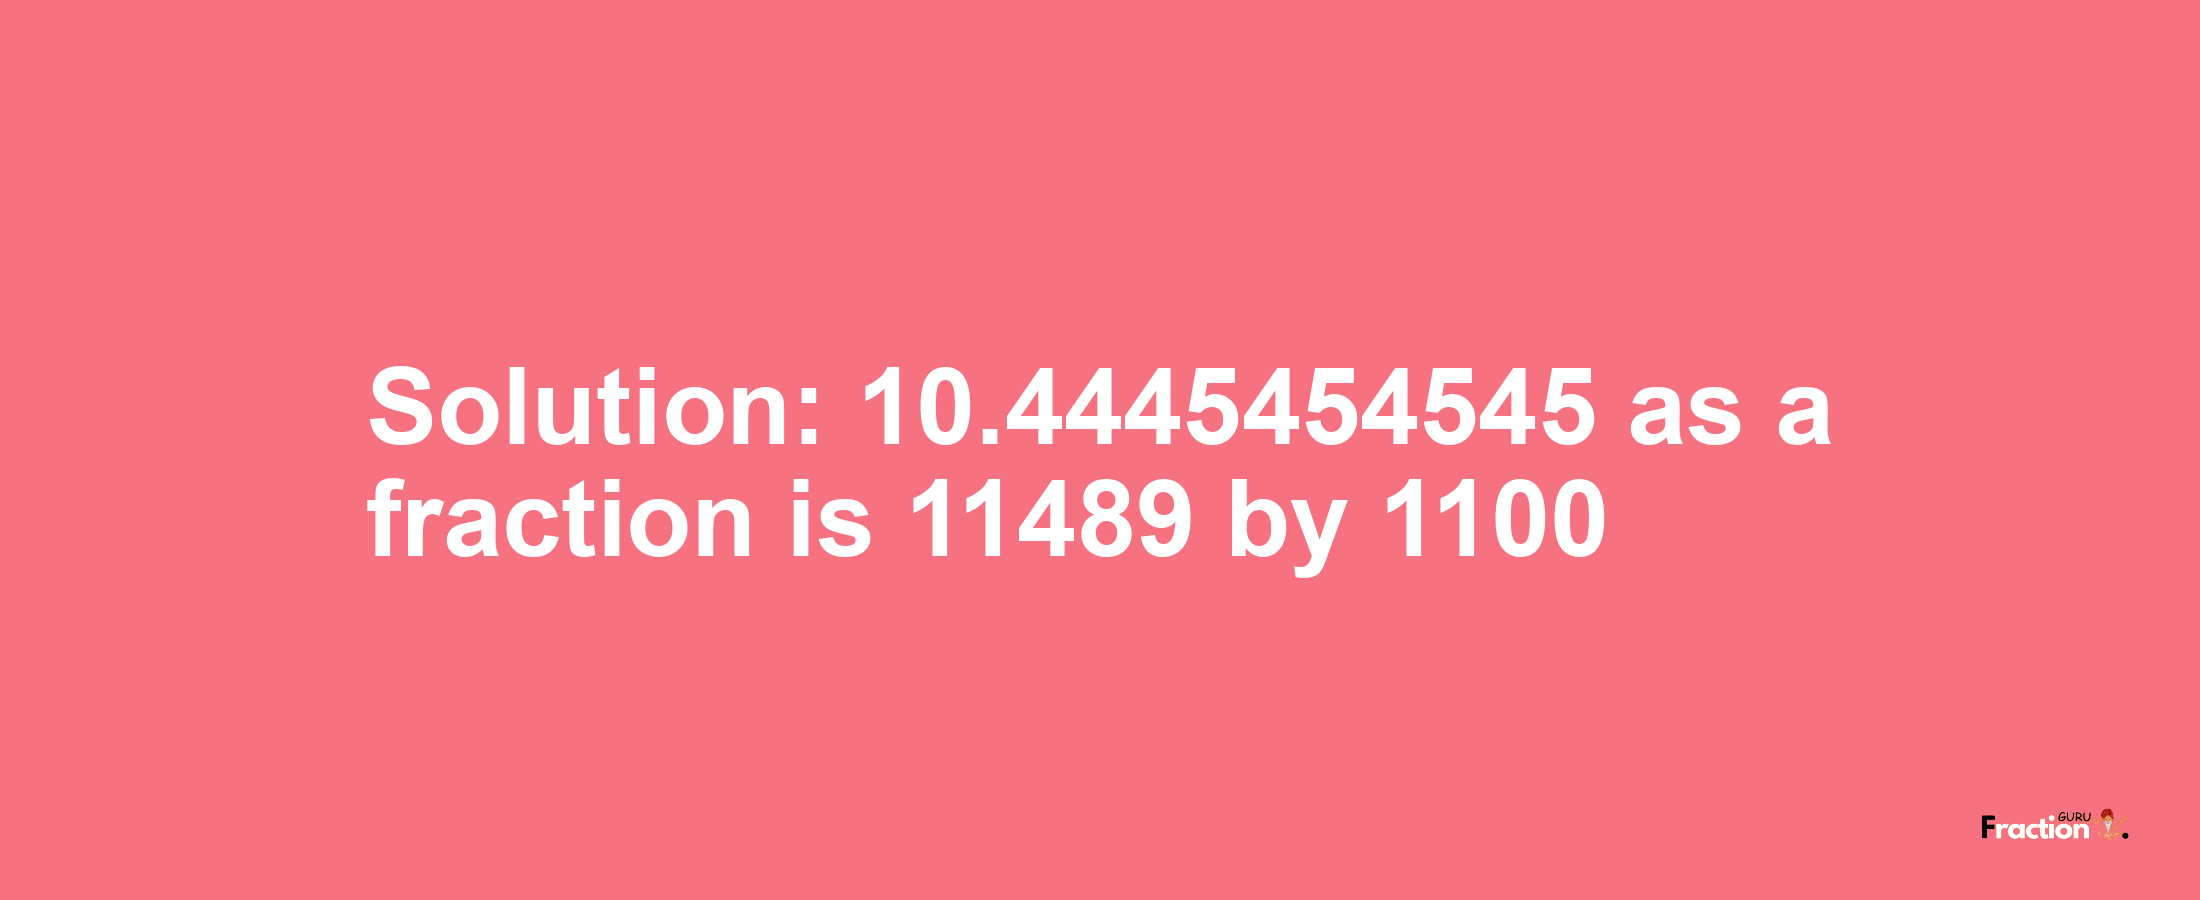 Solution:10.4445454545 as a fraction is 11489/1100